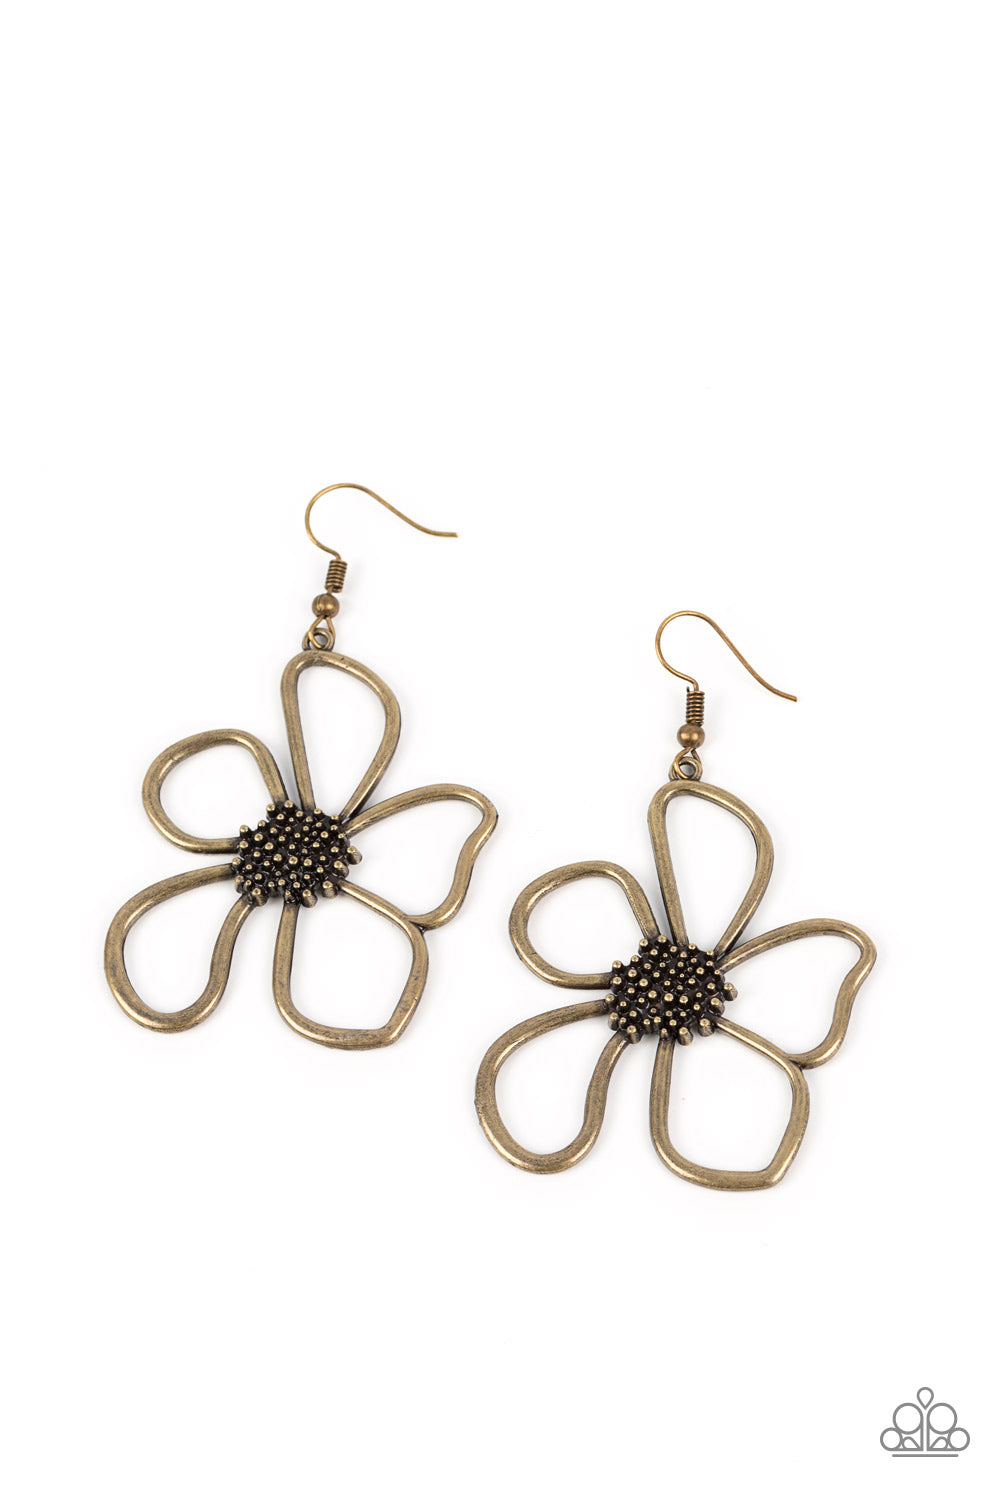 Wildflower Walkway - Brass Flower Earrings - Paparazzi Accessories - Warped brass bars curl into asymmetrical petals that flare out from a studded brass center, blooming into a free-spirited wildflower. Earring attaches to a standard fishhook fitting. Sold as one pair of earrings.